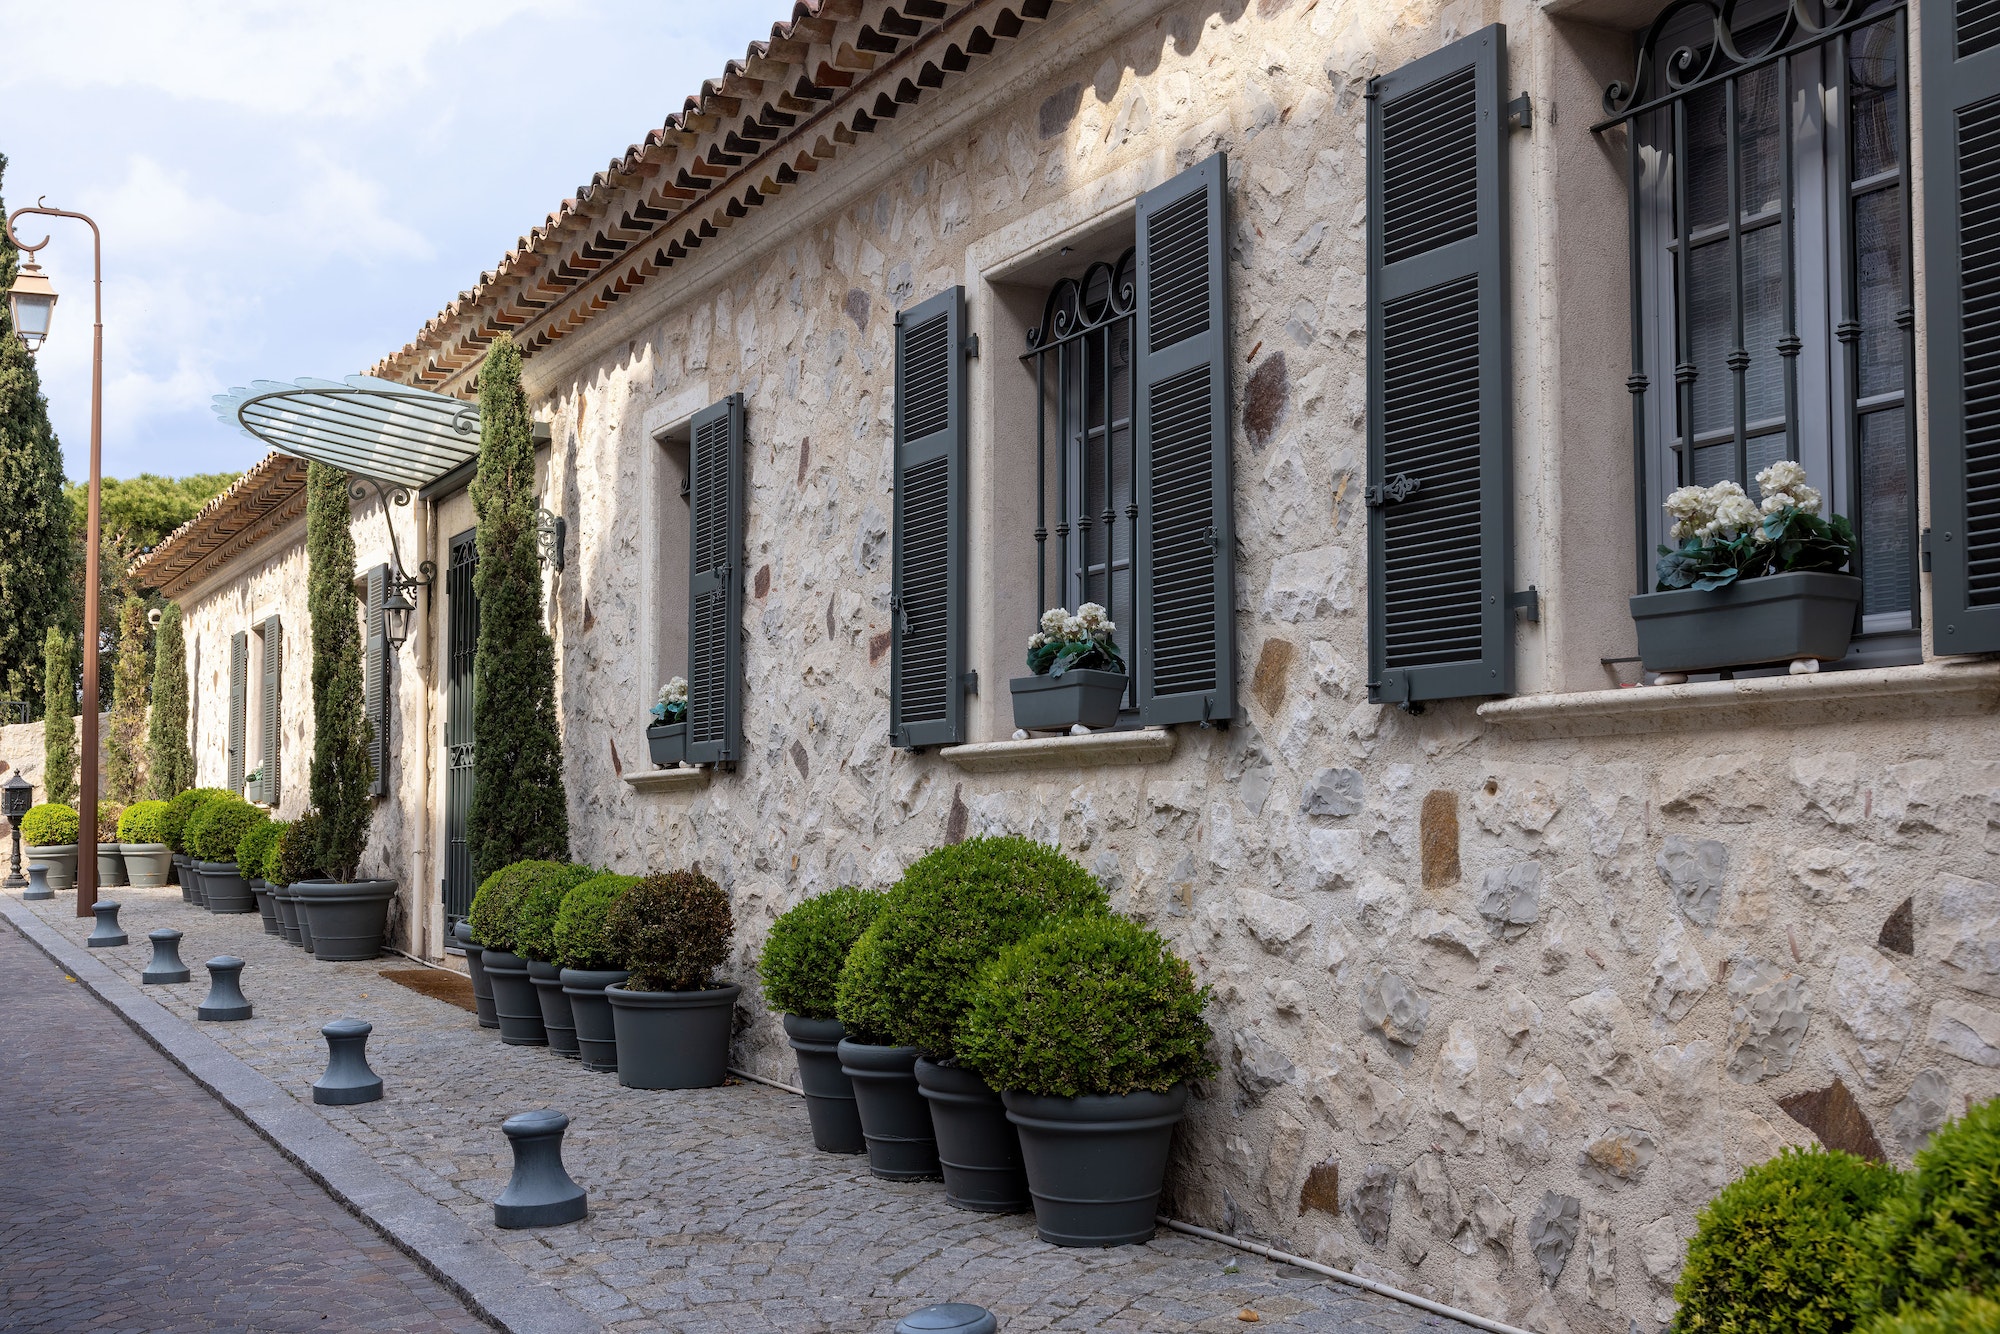 House in a typical Provencal style in Cannes, southern France, on Cote d'Azur